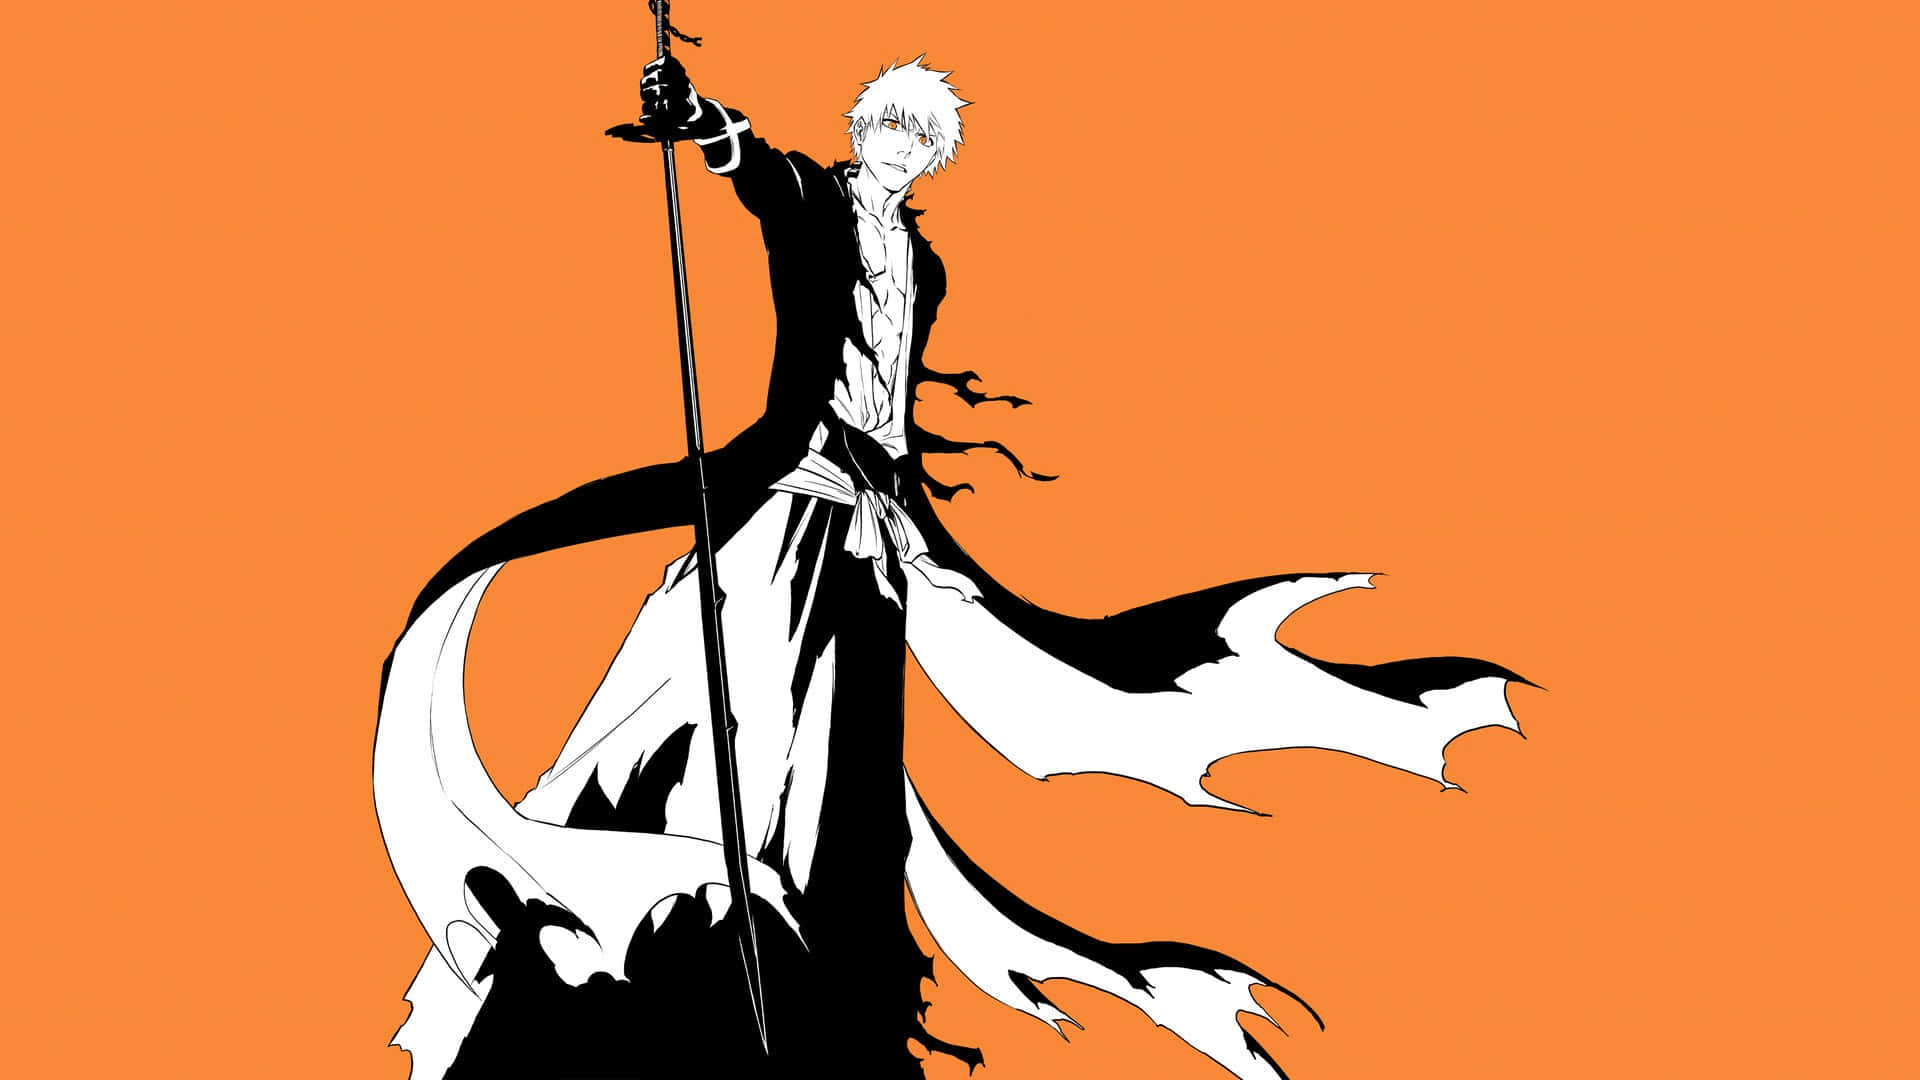 Ichigo and the Arrancars Unite to Fight in the Thousand-Year Blood War Wallpaper